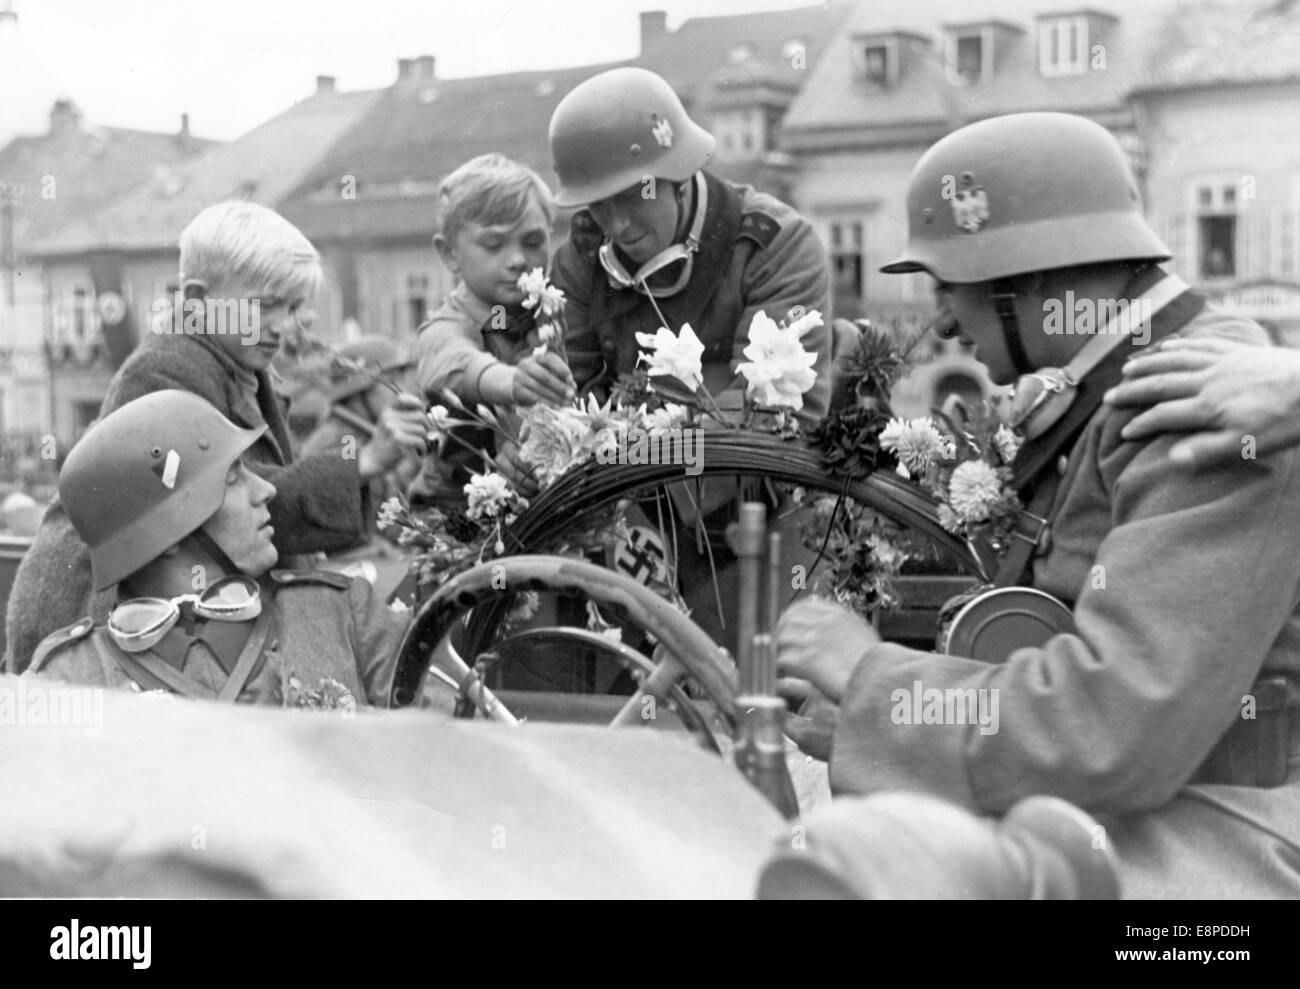 The Nazi propaganda picture shows the celebrations as German troops arrive in Schluckenau, Sudetenland (today, Sluknov, Czech Republic) in October 1938. The original text from a Nazi news report on the back of the picture reads: 'Excited reception for German troops in Schluckenau. The cheers and excitement was indescribable as German troops marched into Schluckenau. Women and children couldn't do enough to decorate the soldiers with flowers and to express the happy feelings in the most beautiful of ways.' Fotoarchiv für Zeitgeschichtee - NO WIRE SERVICE Stock Photo